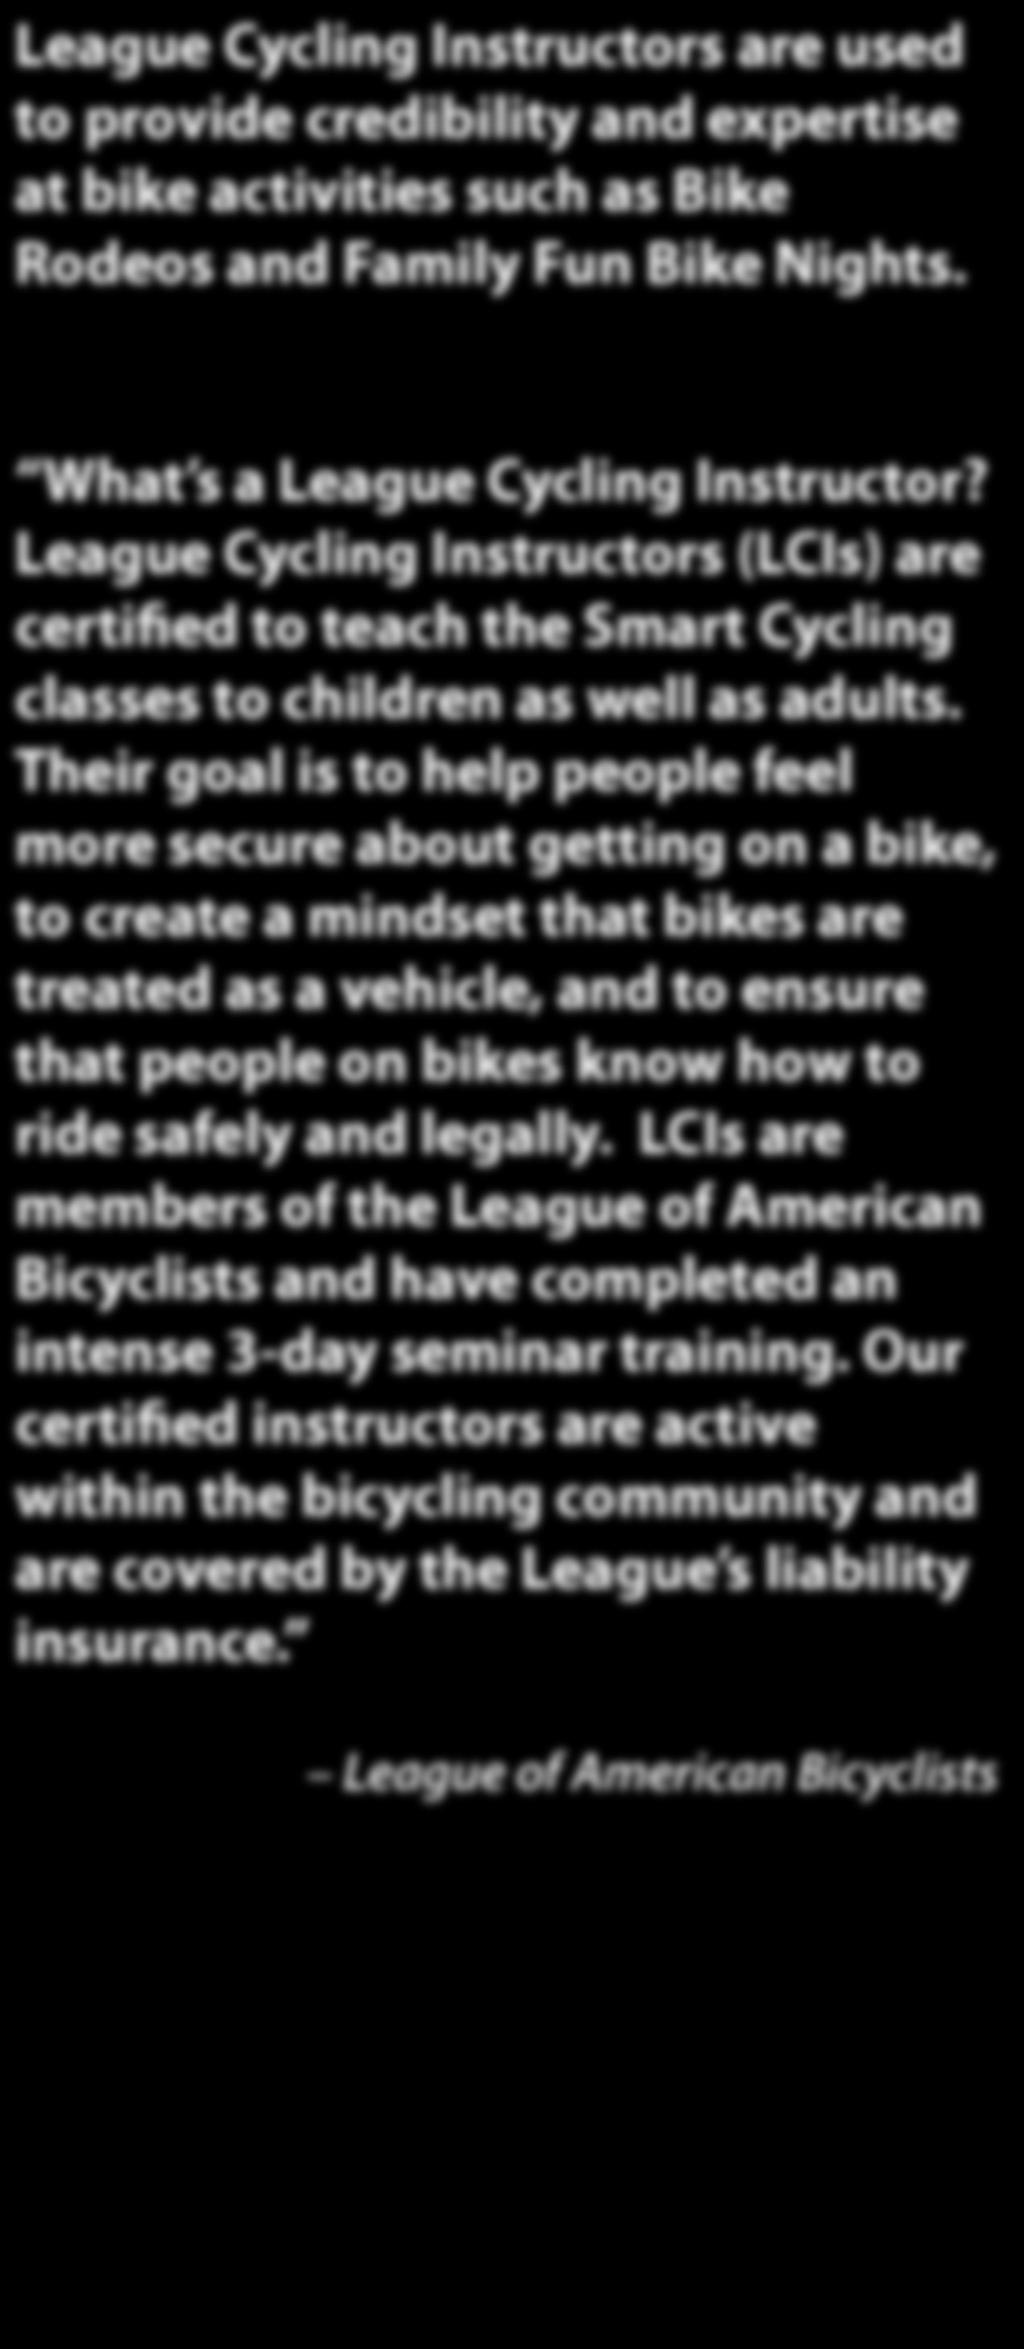 Their goal is to help people feel more secure about getting on a bike, to create a mindset that bikes are treated as a vehicle, and to ensure that people on bikes know how to ride safely